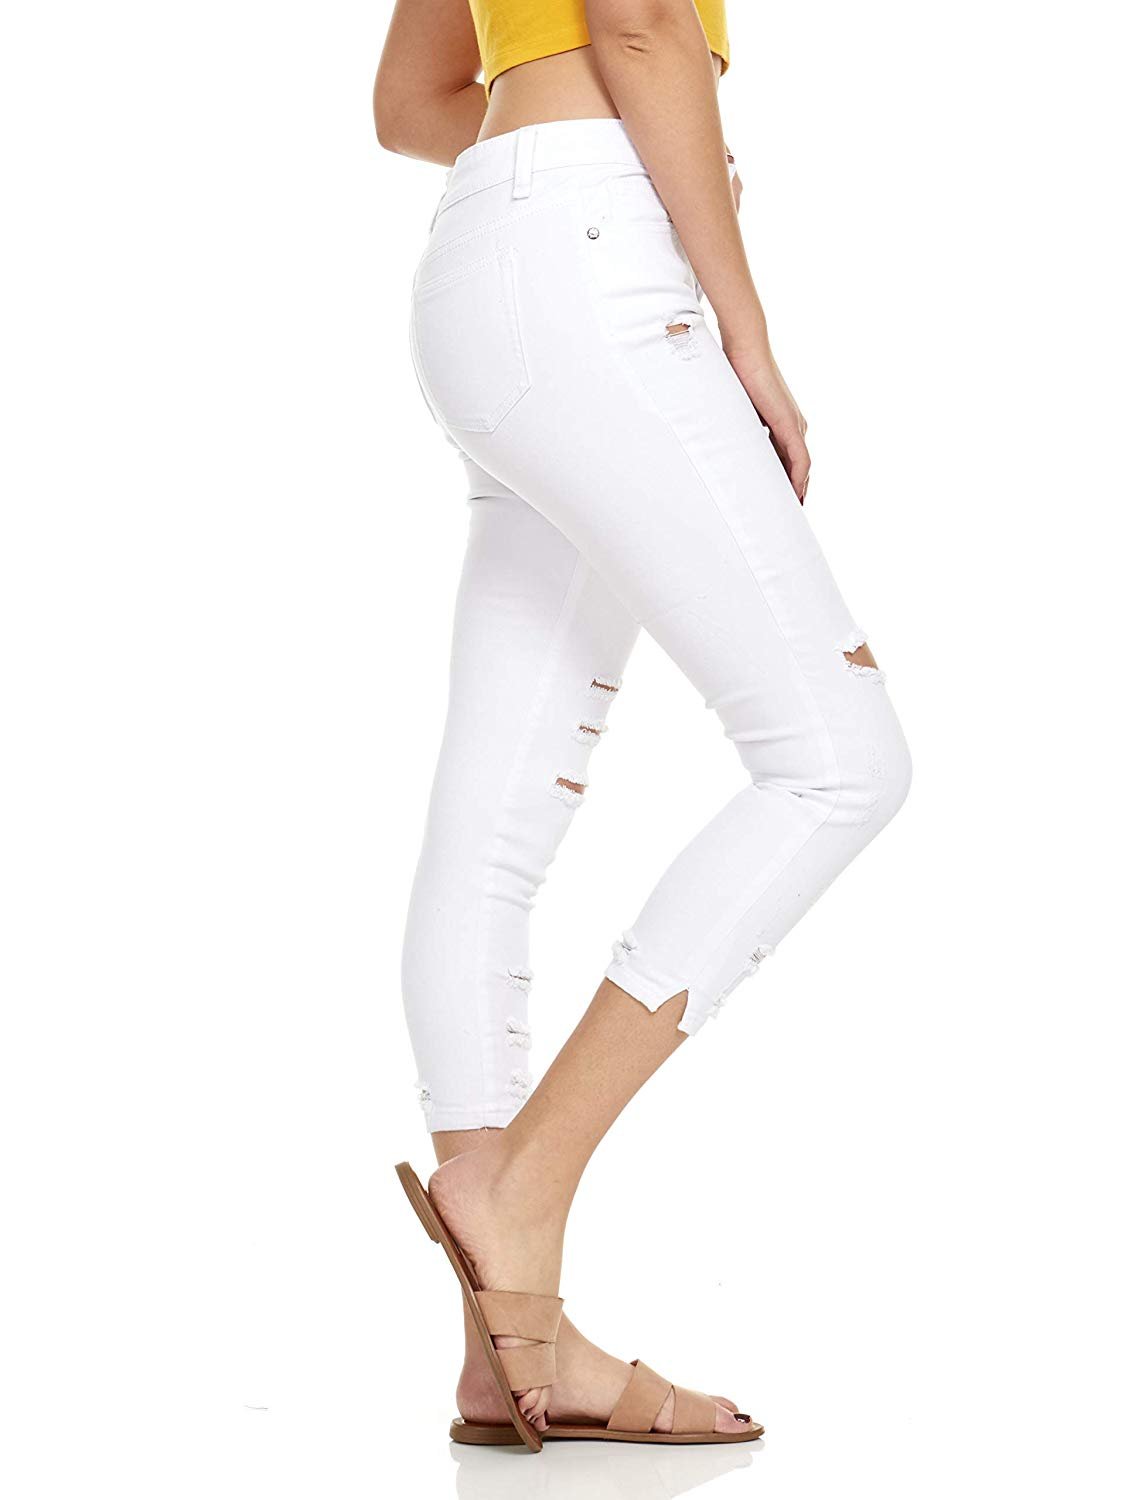 YDX Smart Jeans High Waisted Casual Stretchy Comfy Ripped Cropped Hem Pants White Wash Size Juniors 1 - image 2 of 5